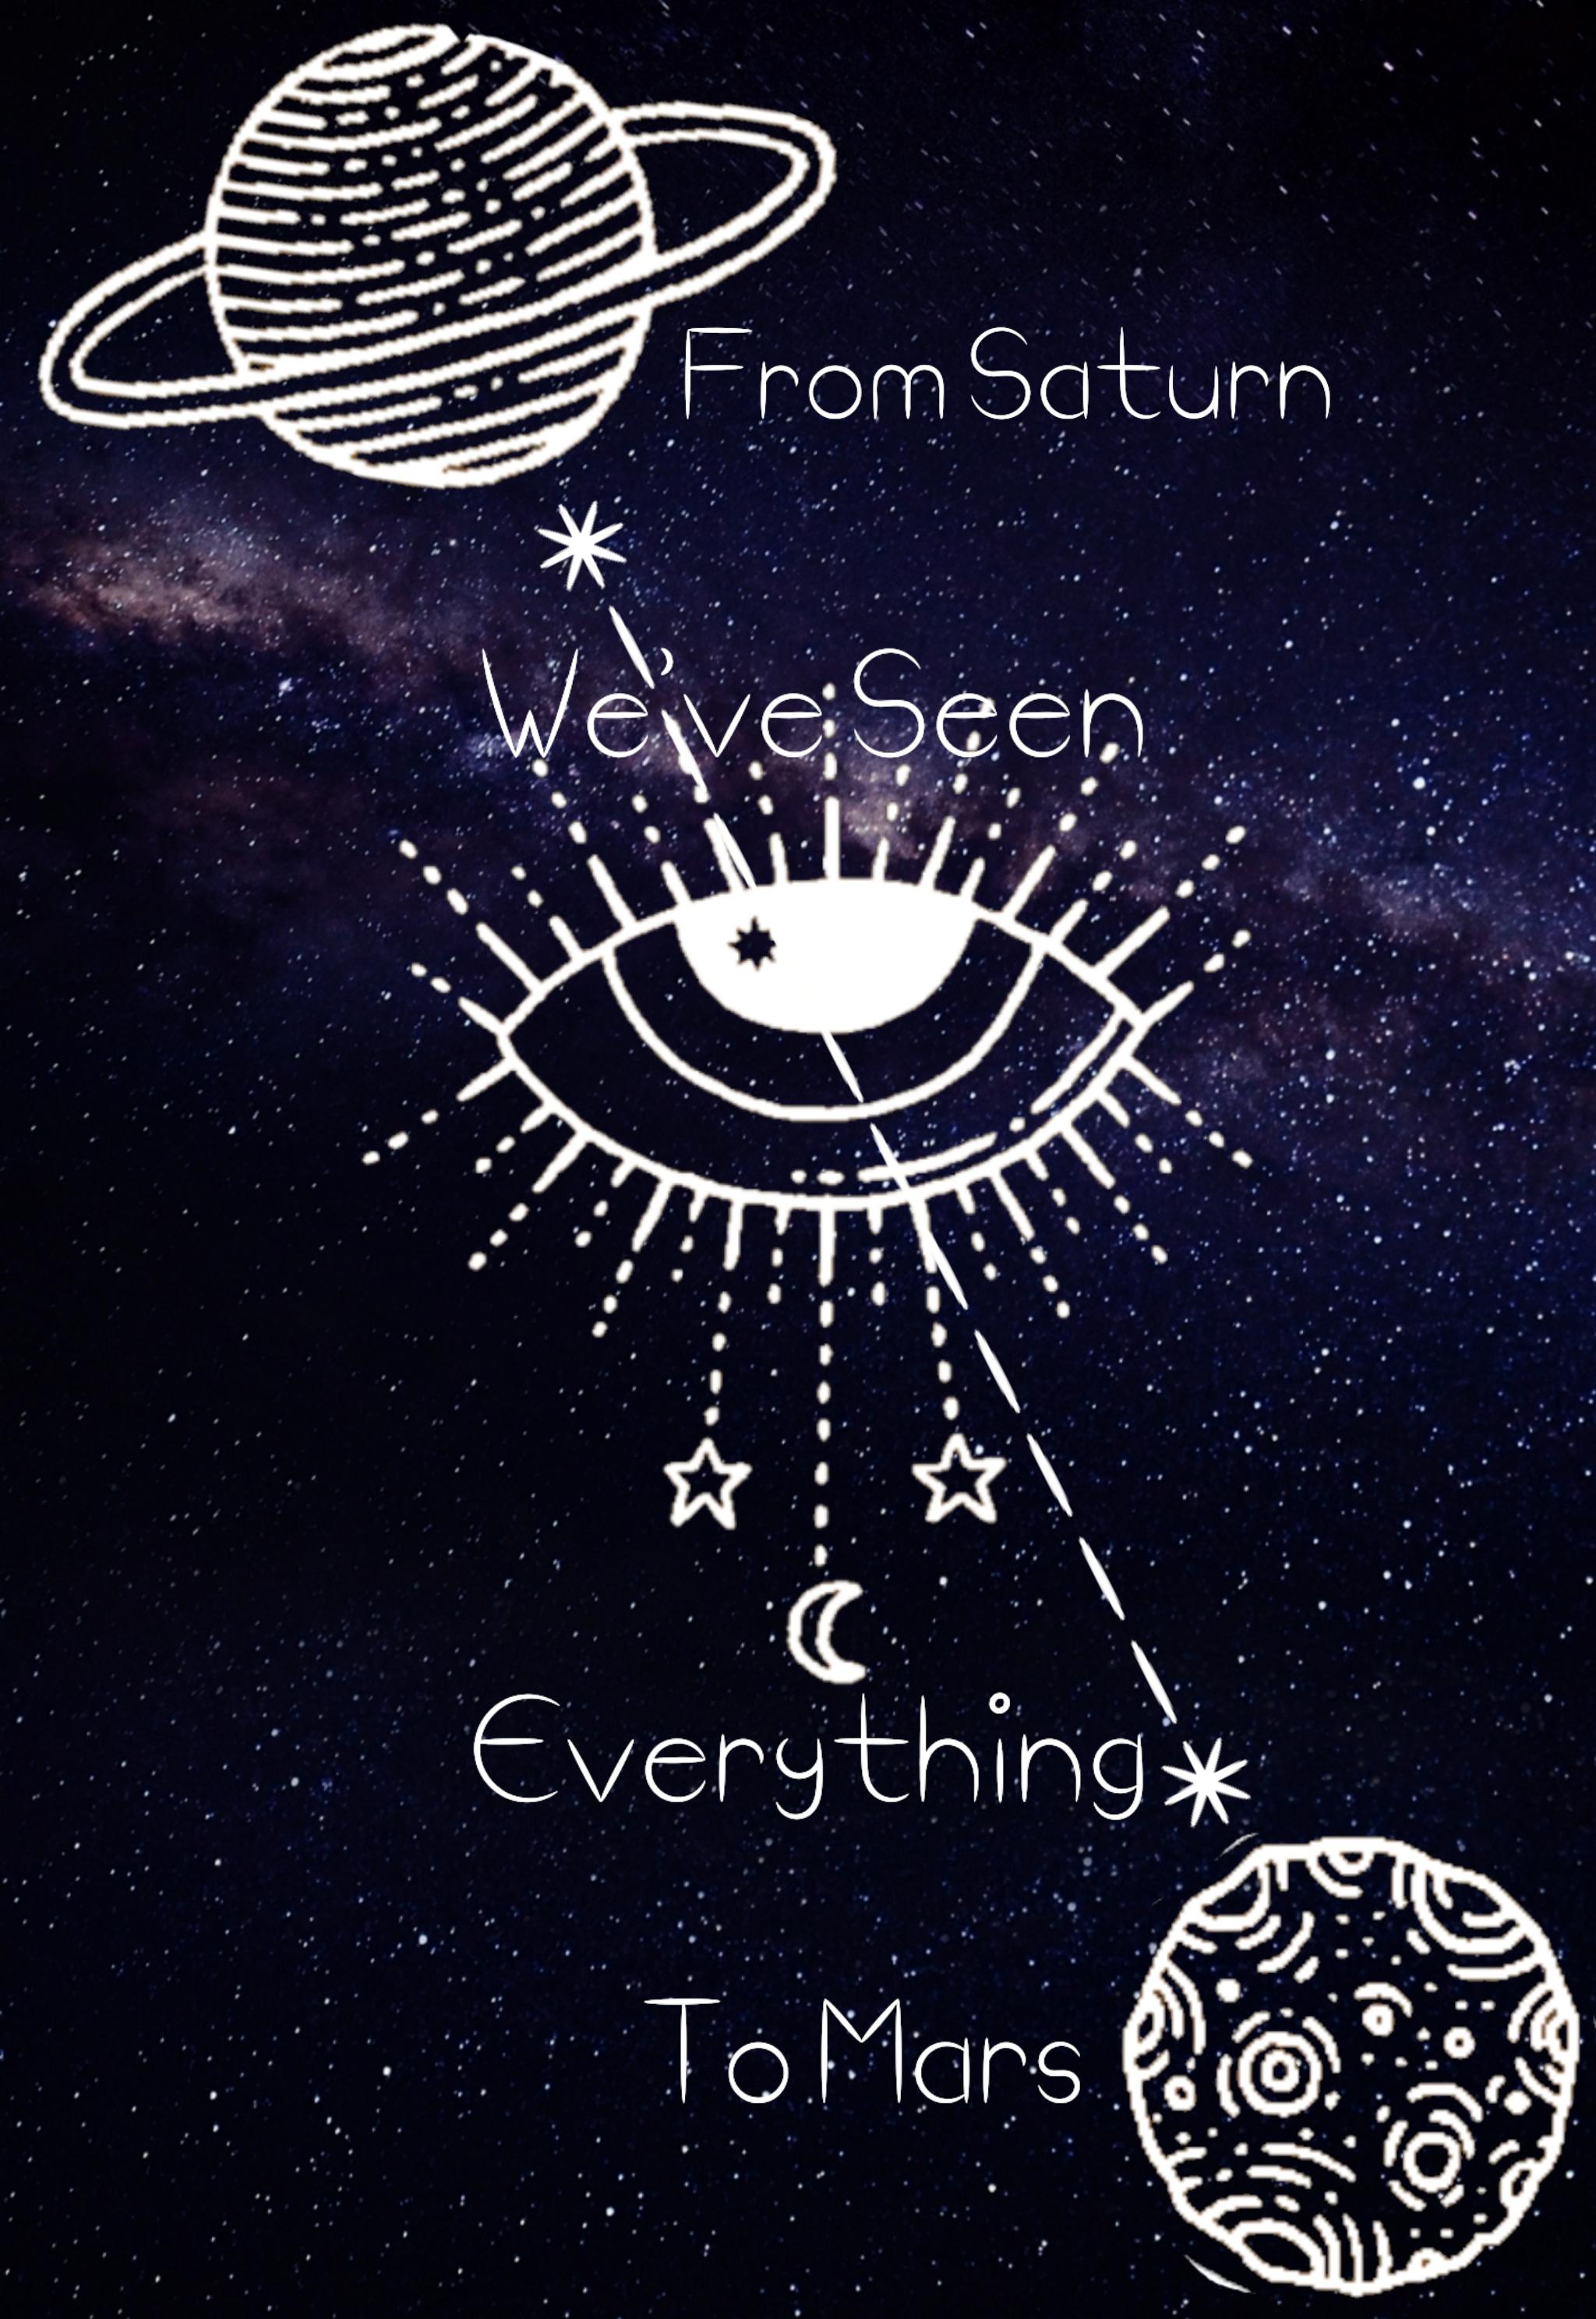 Some Wallpaper That I Made Based Off Of The MAGNIFICENT Song Astronomy By The PHENOMENAL, ✨Conan Gray✨ P.S. You All Are Shining, Sparkling, And Stunning Super Stars